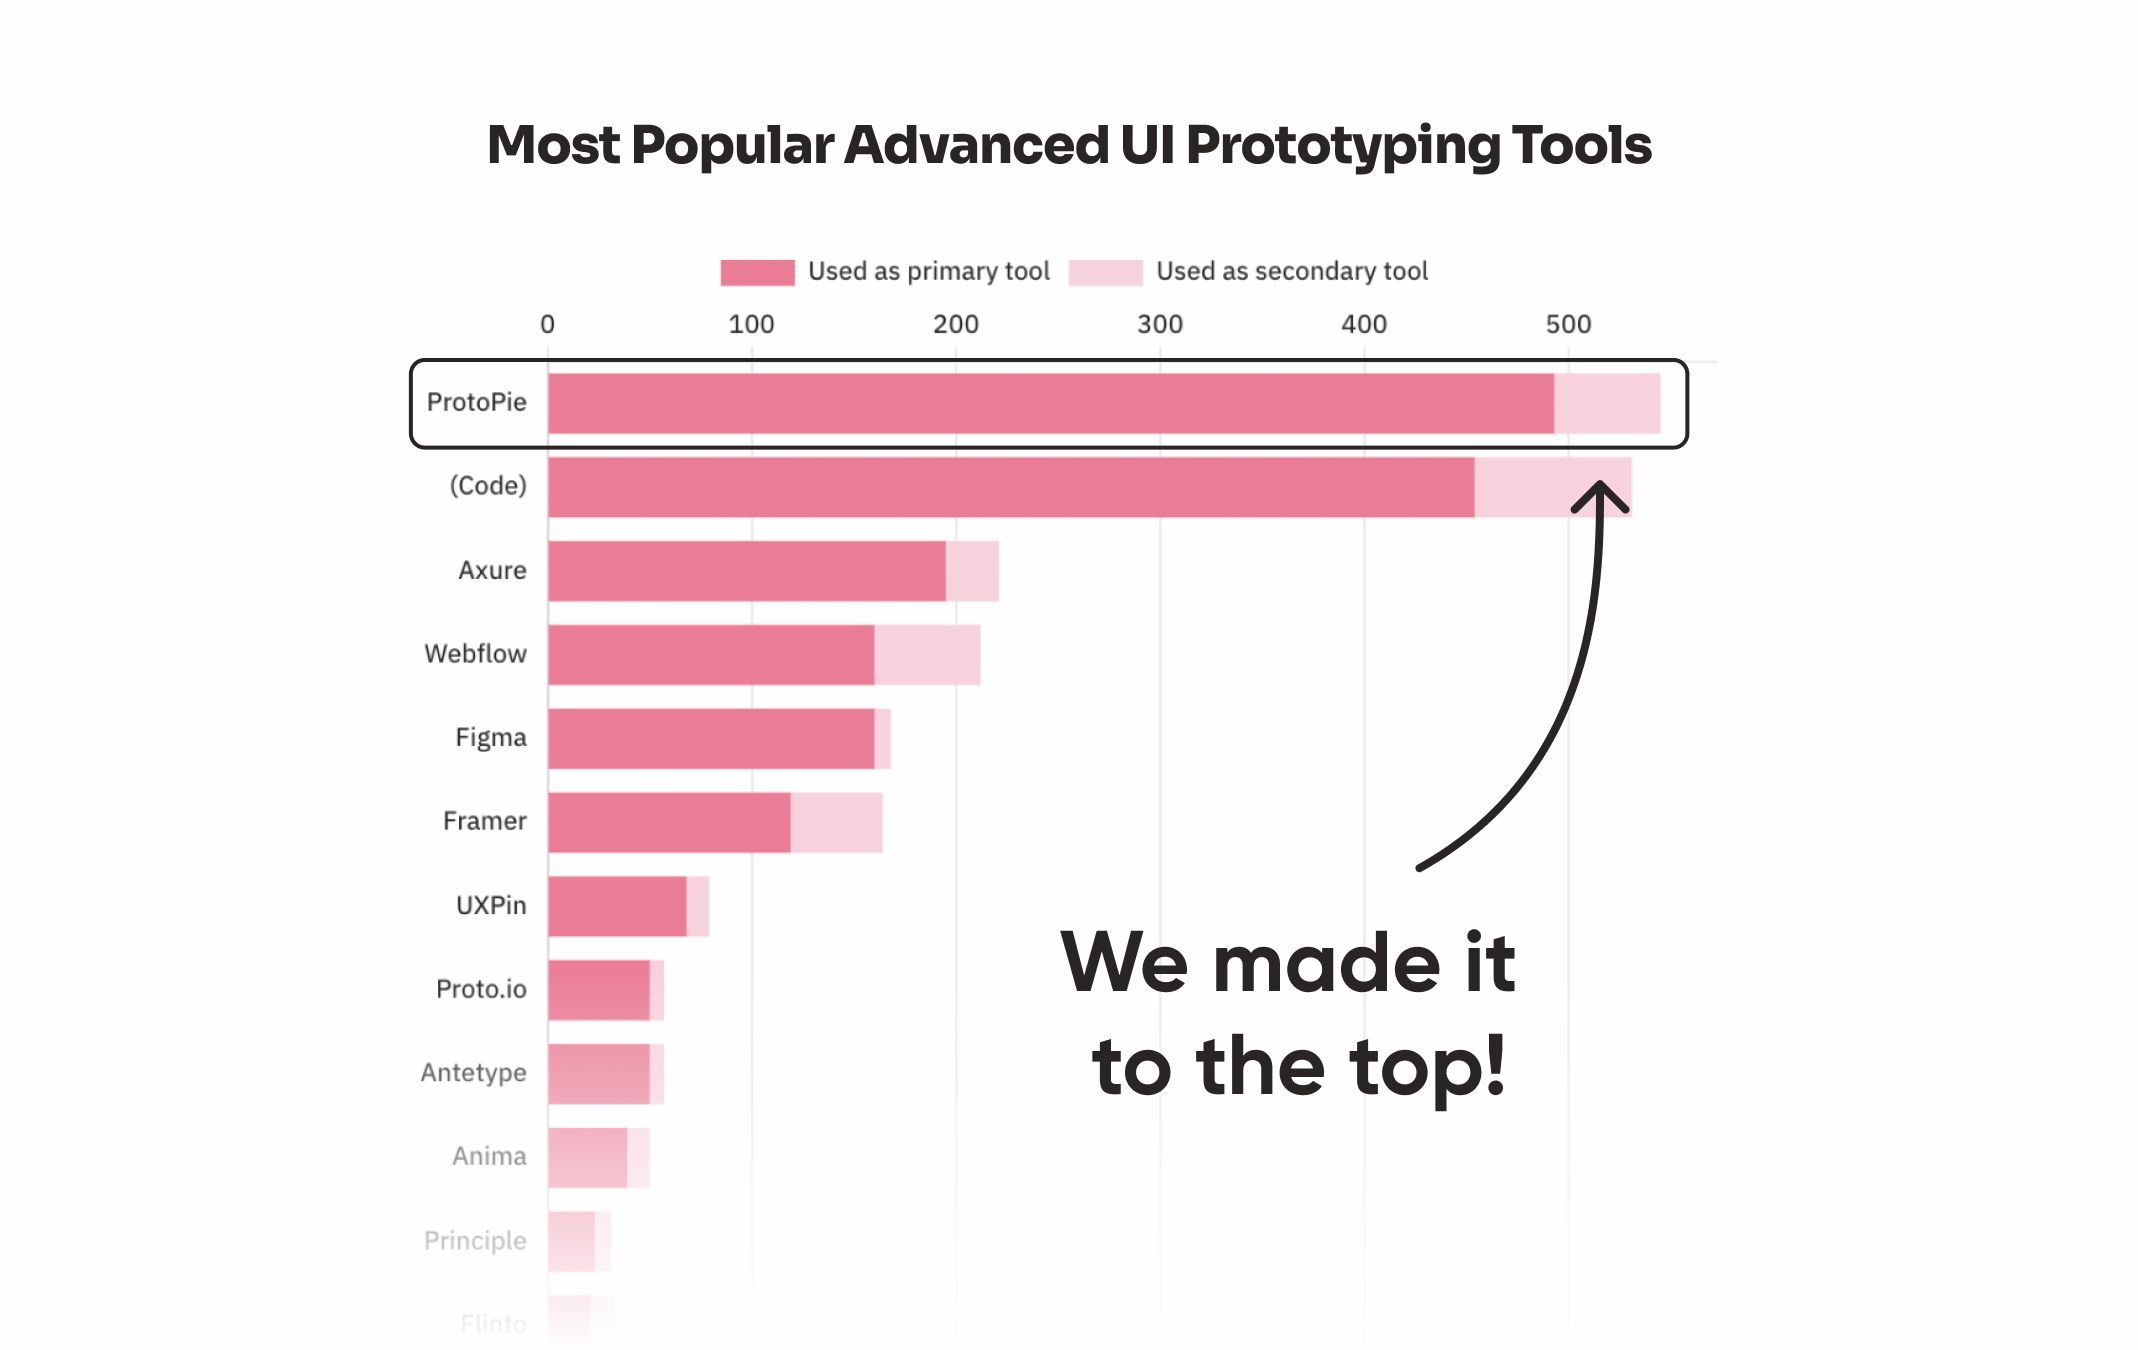 The most advanced UI prototyping tools